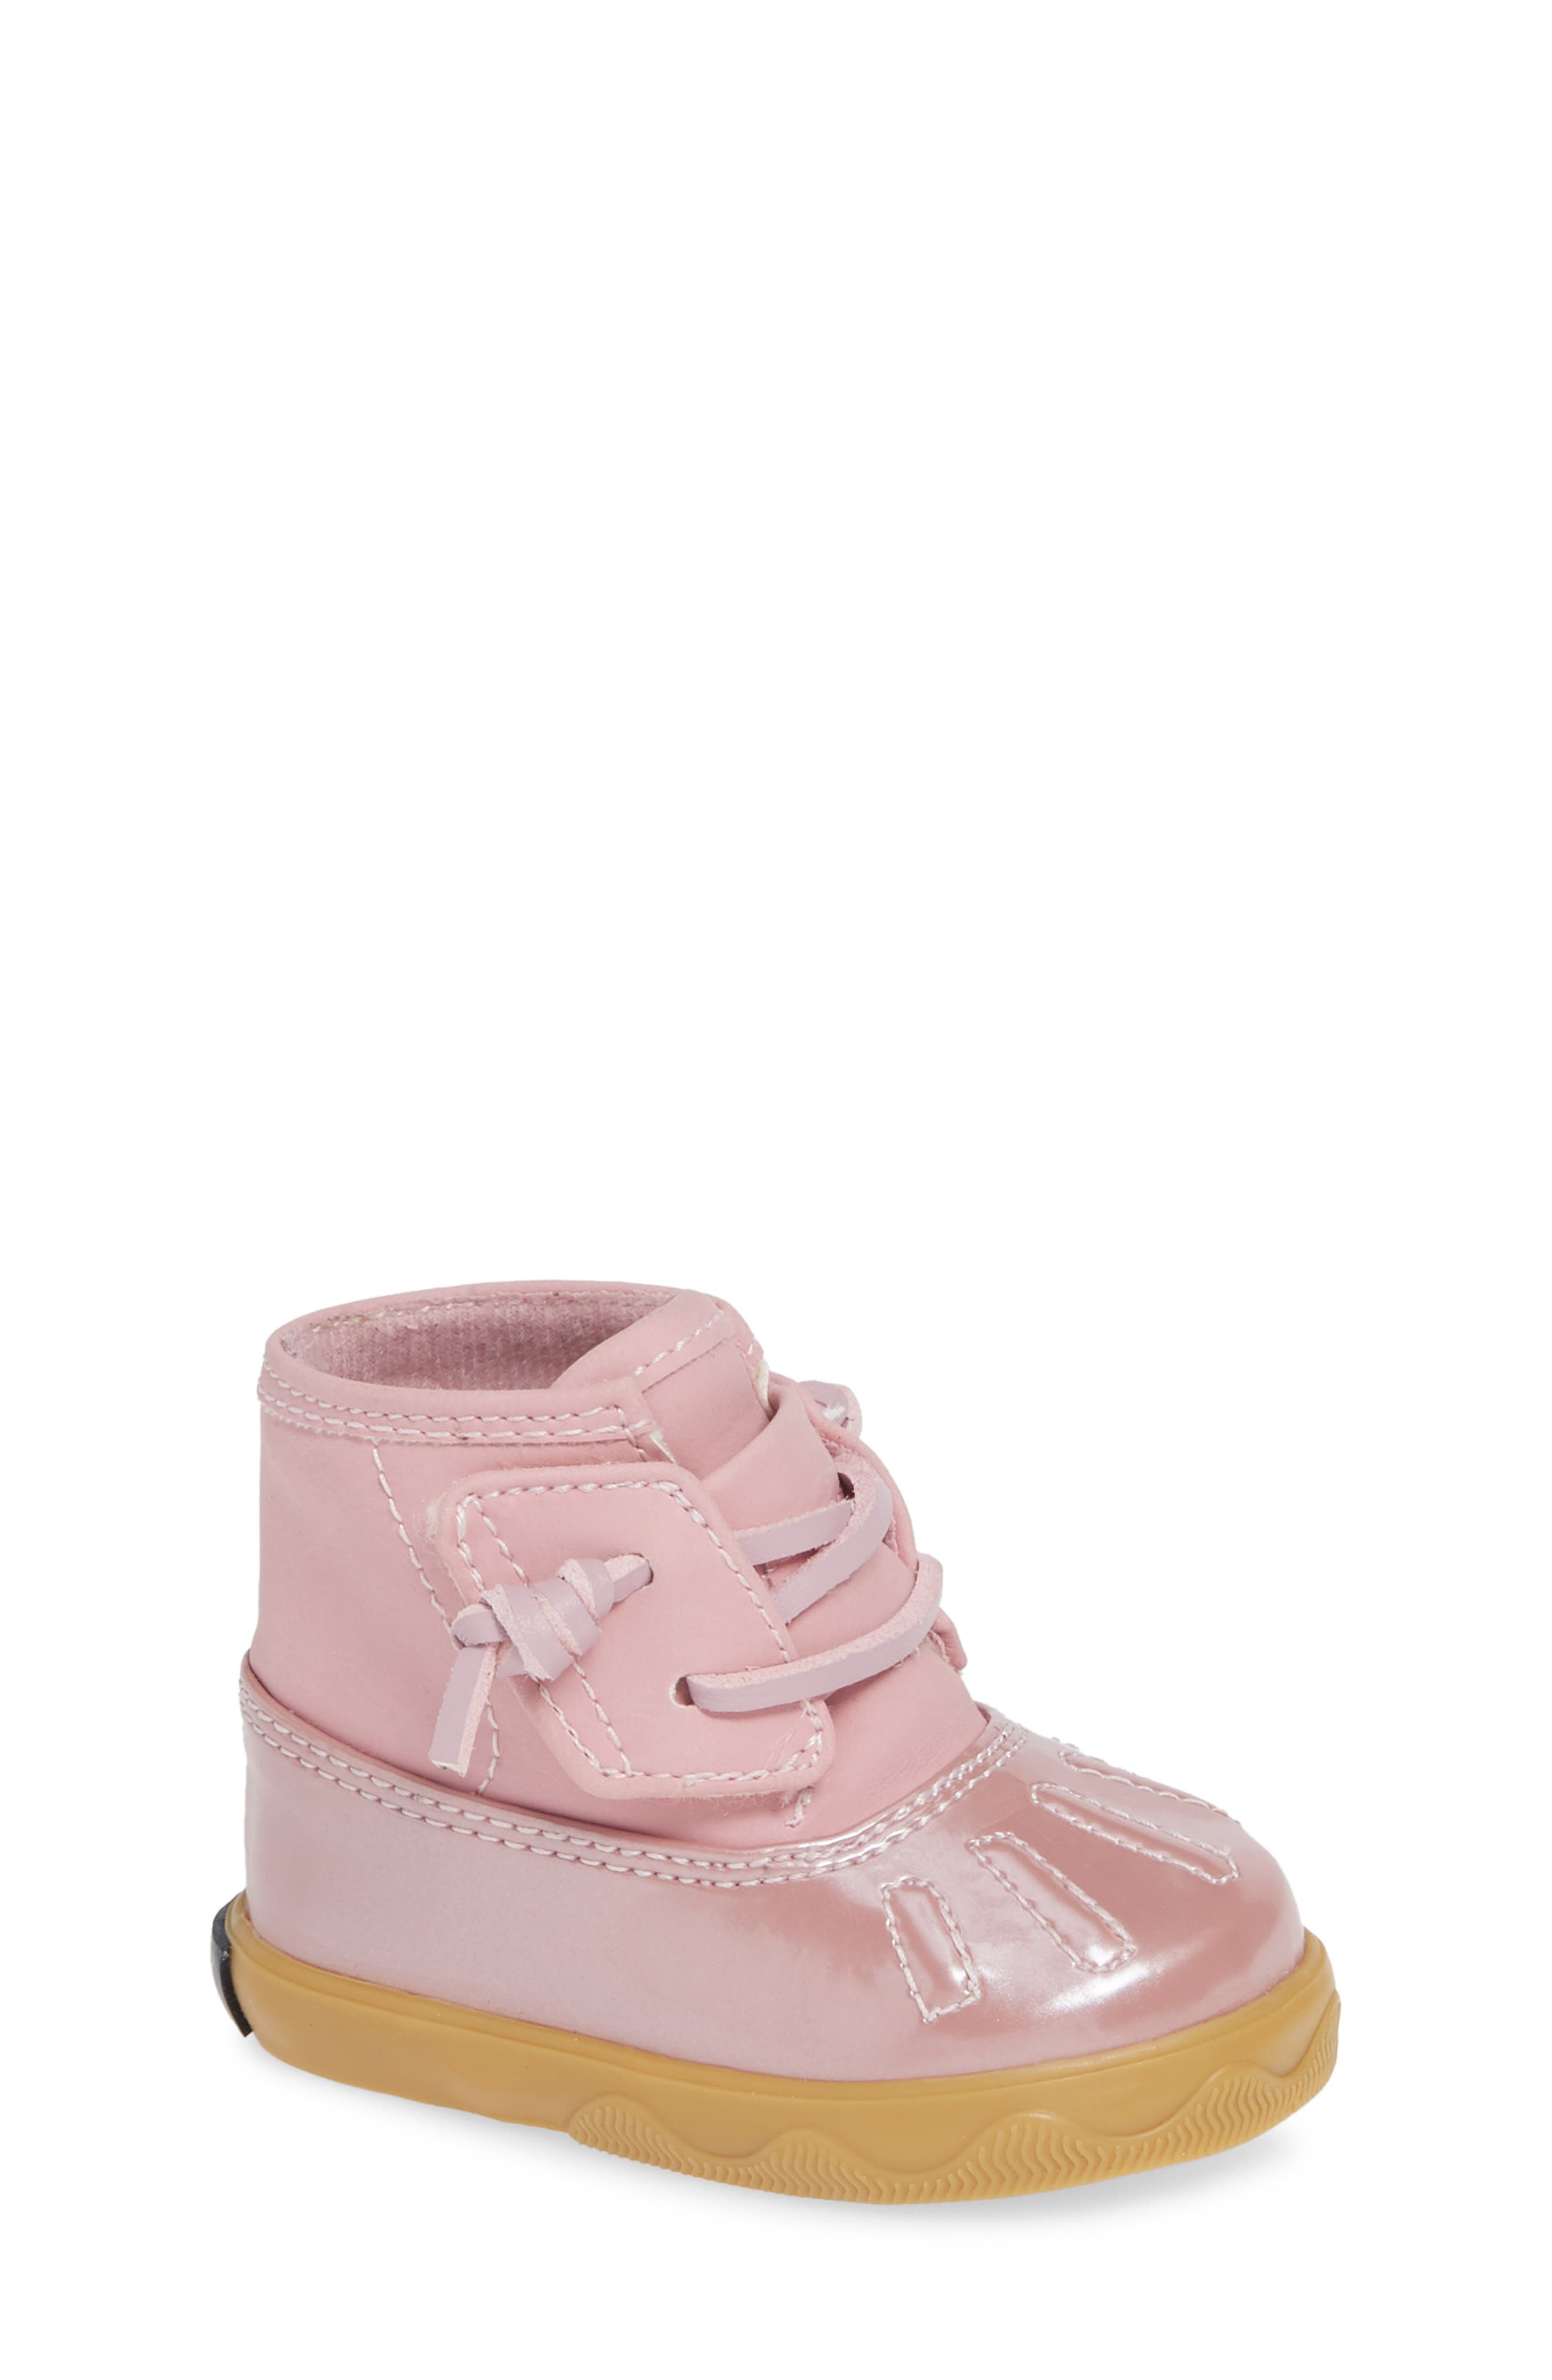 sperry duck boots for infants